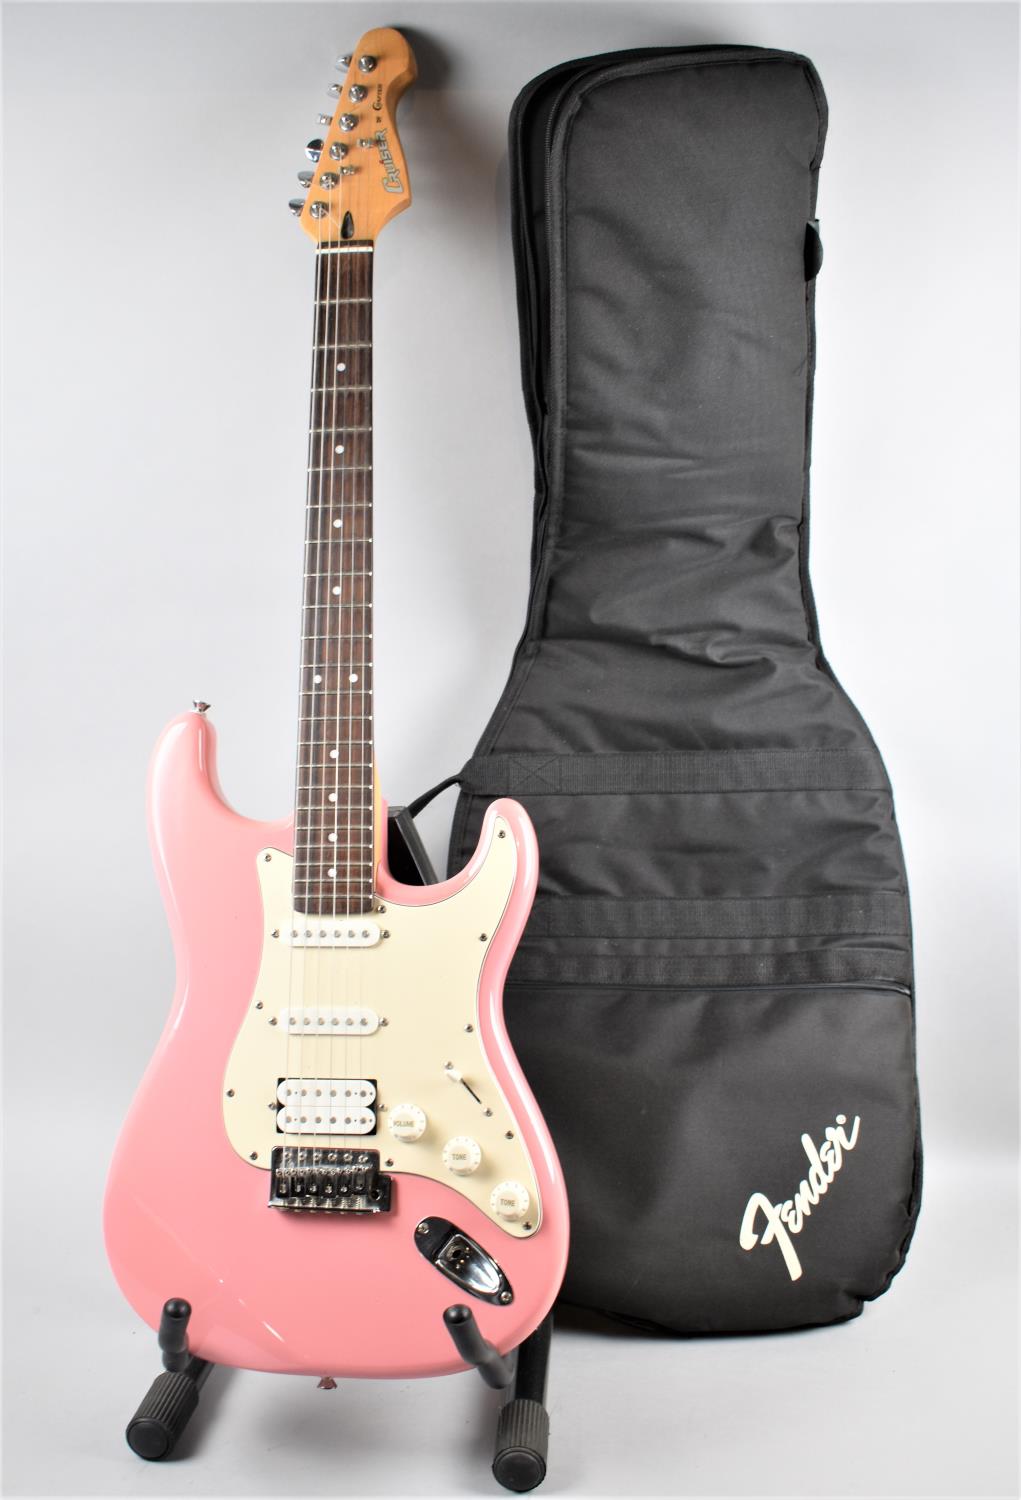 A Modern Electric Guitar, The Cruiser by Crafter together with Canvas Carrying Bag